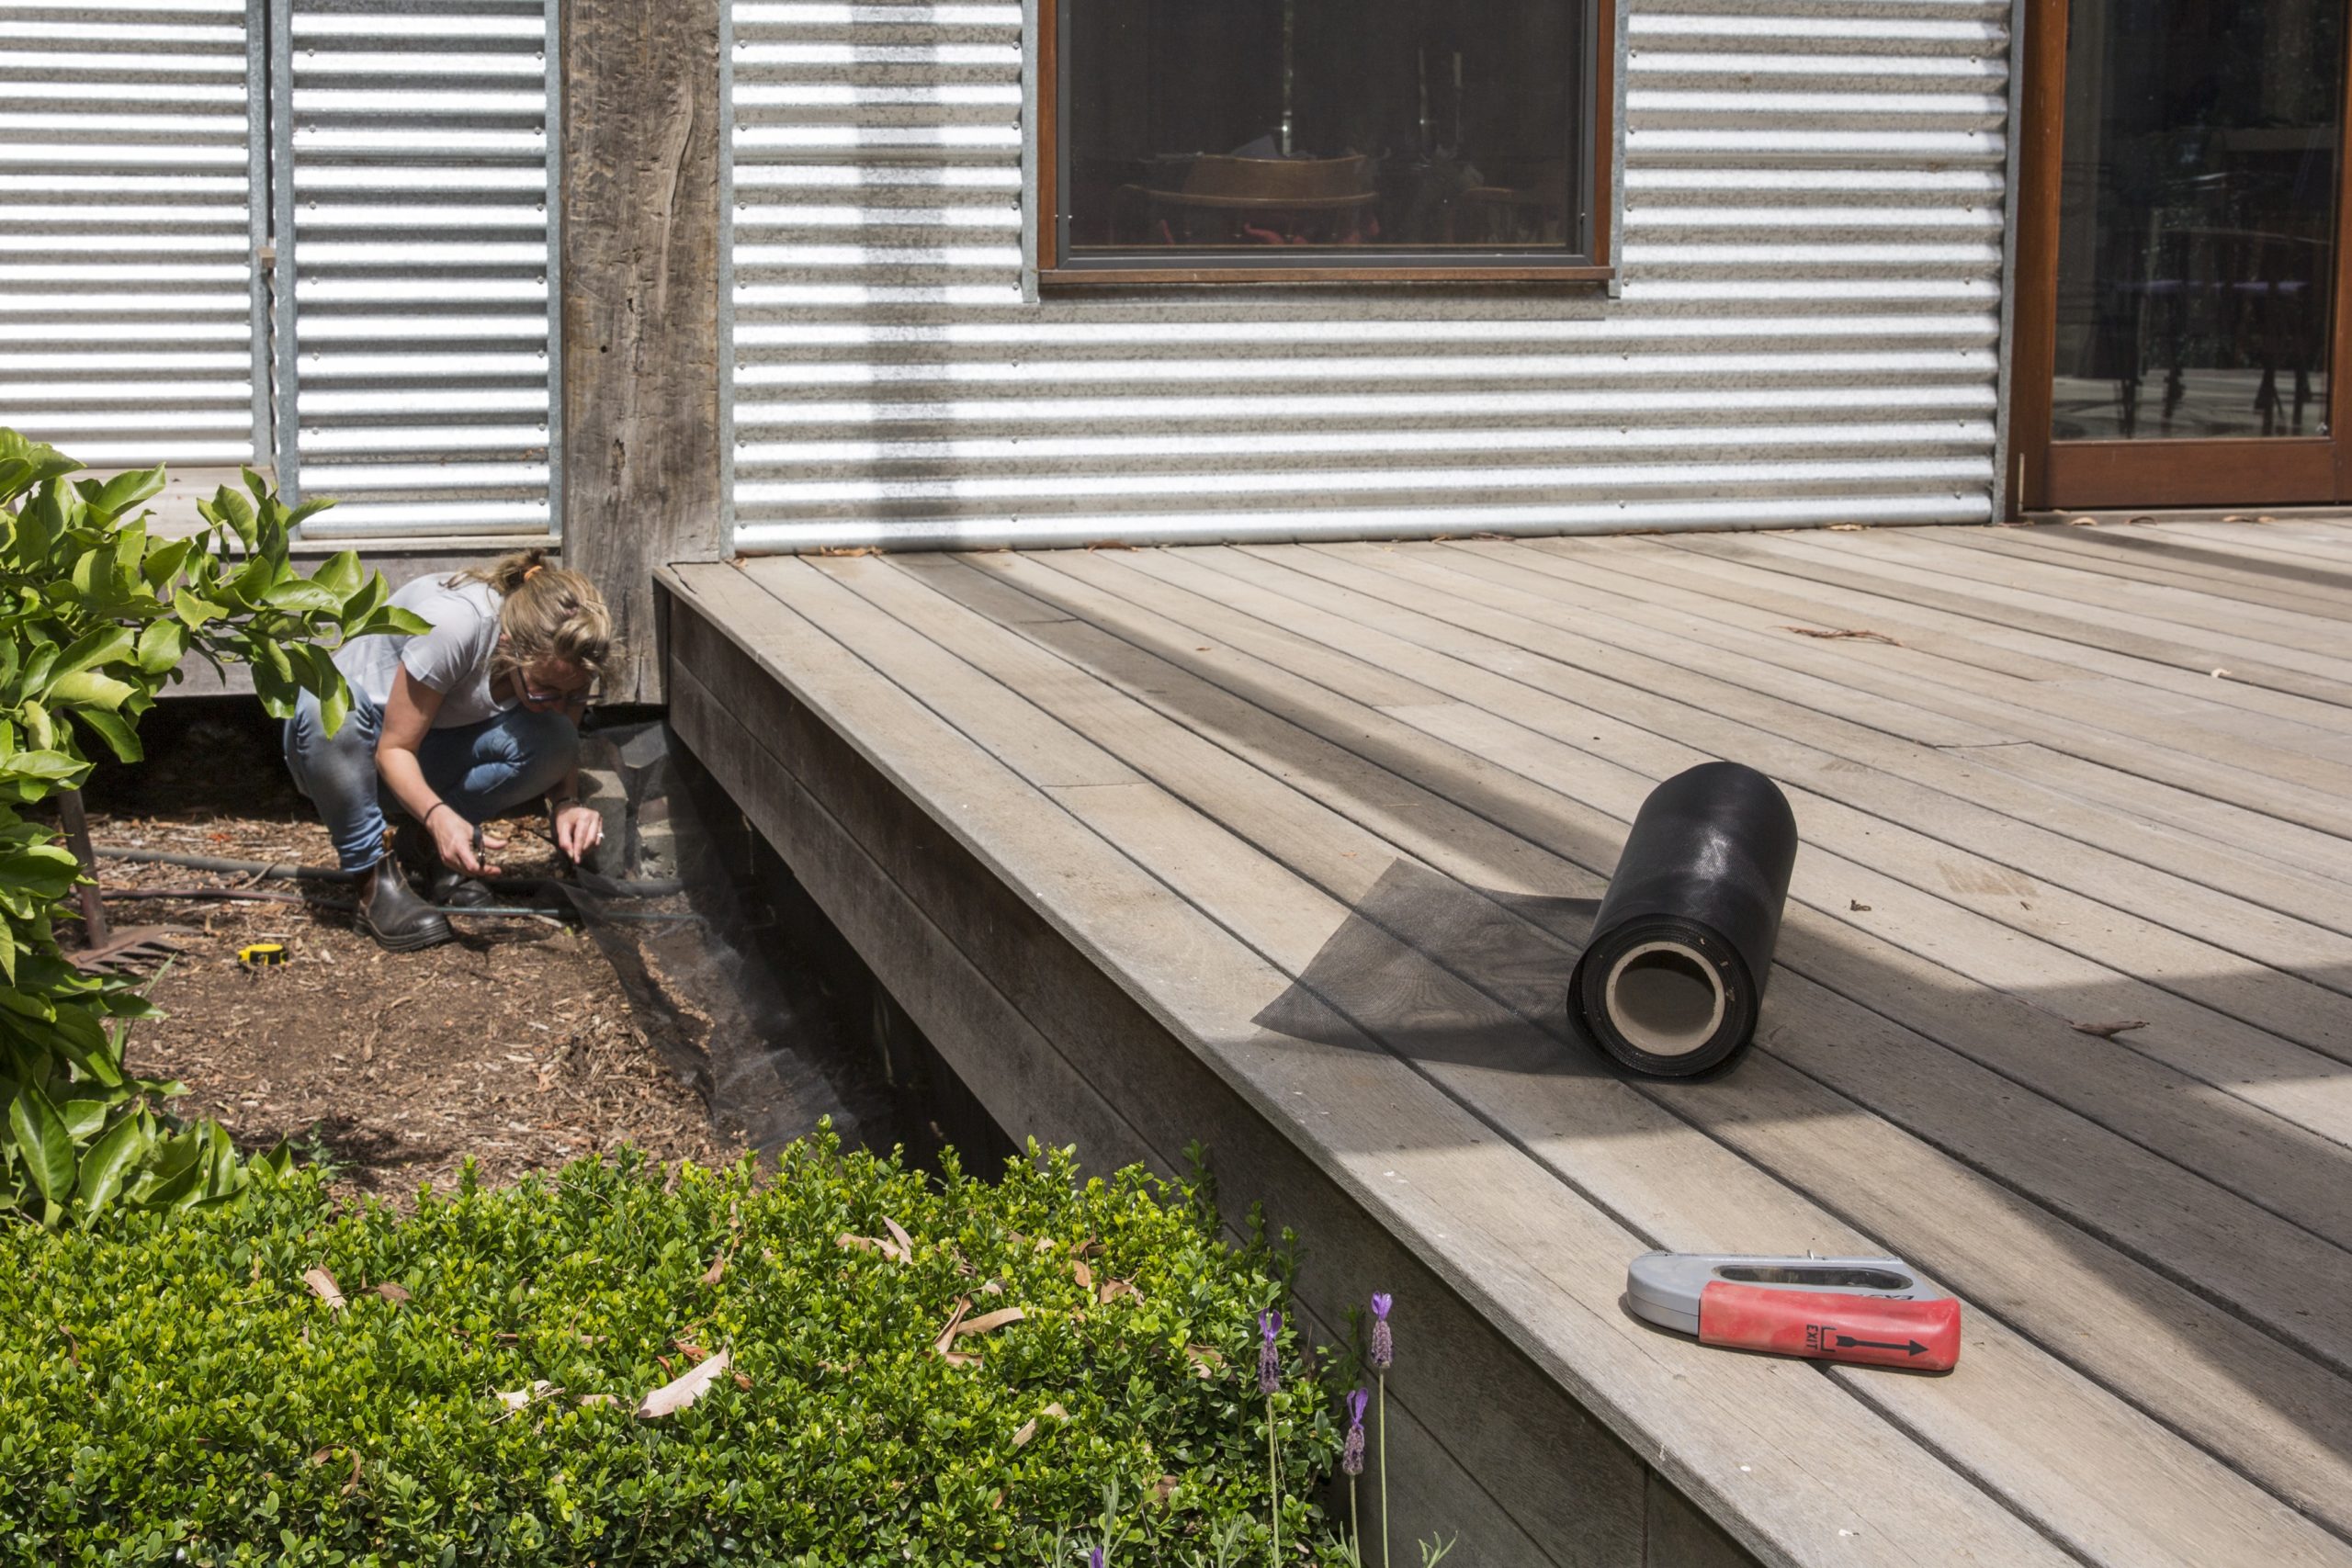 Woman crouches to install screening under house's wooden deck